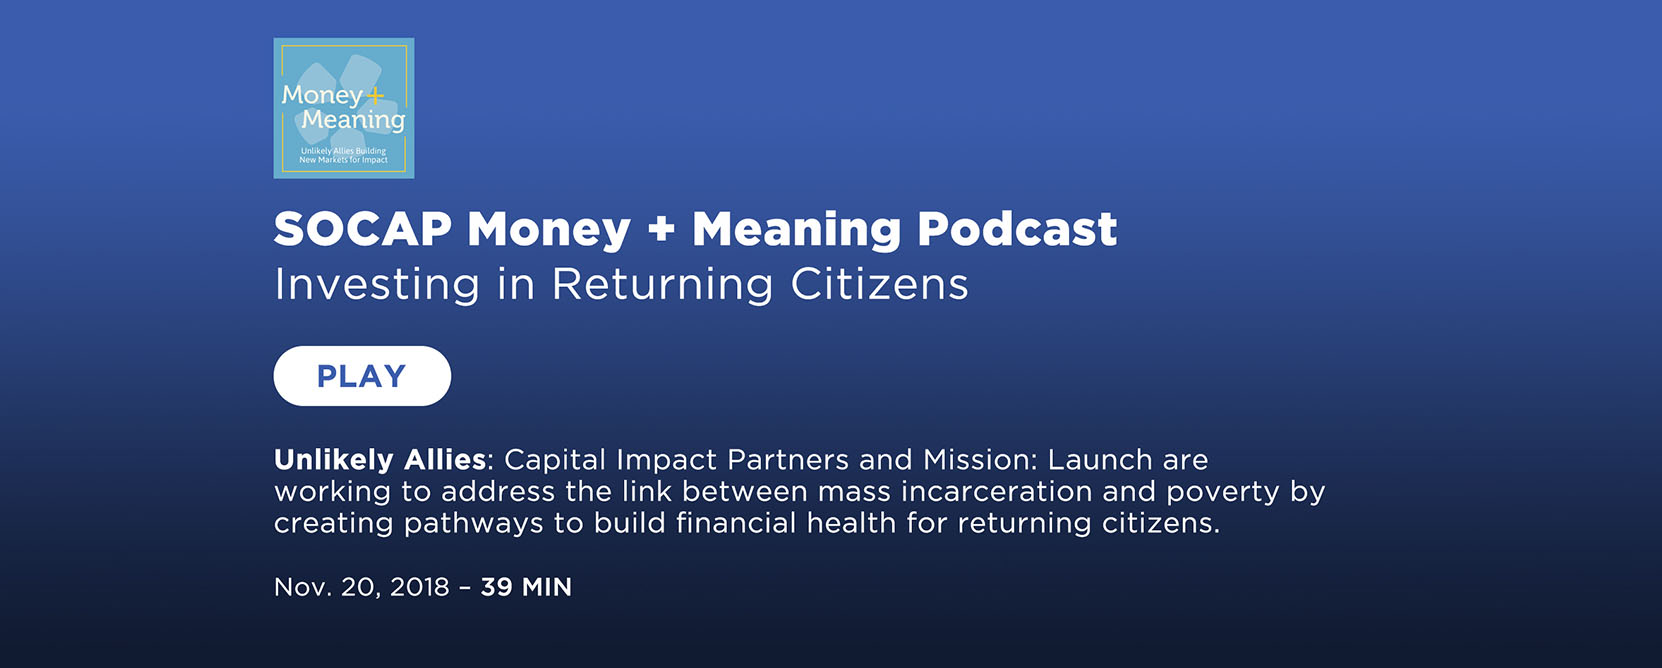 SOCAP Money + Meaning Podcast - Investing in Returning Citizens